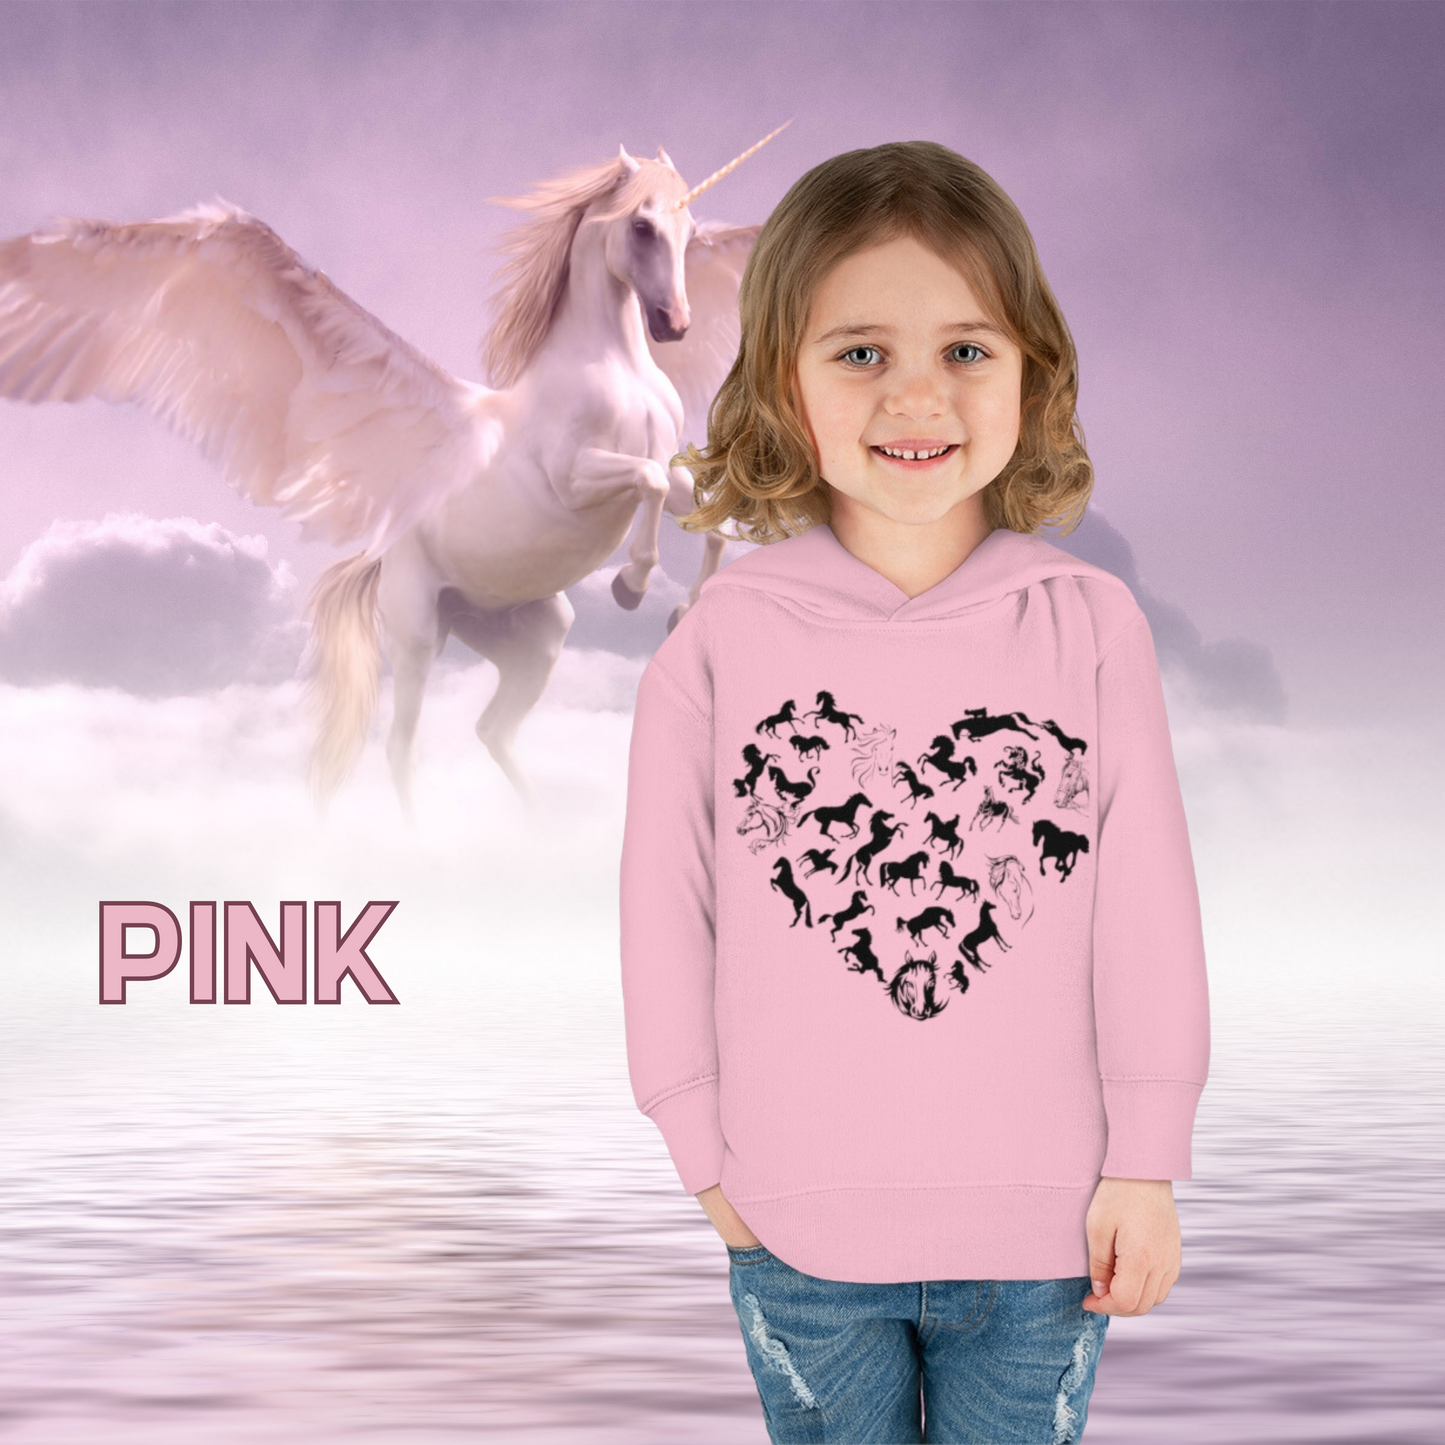 Horse Heart Hoodie | Horse Lover Tee - Horses Heart Toddler - Horse Lover Gift - Horse Toddler Shirt - Equestrian Tee - Gift for Horse Owner Kids clothes   